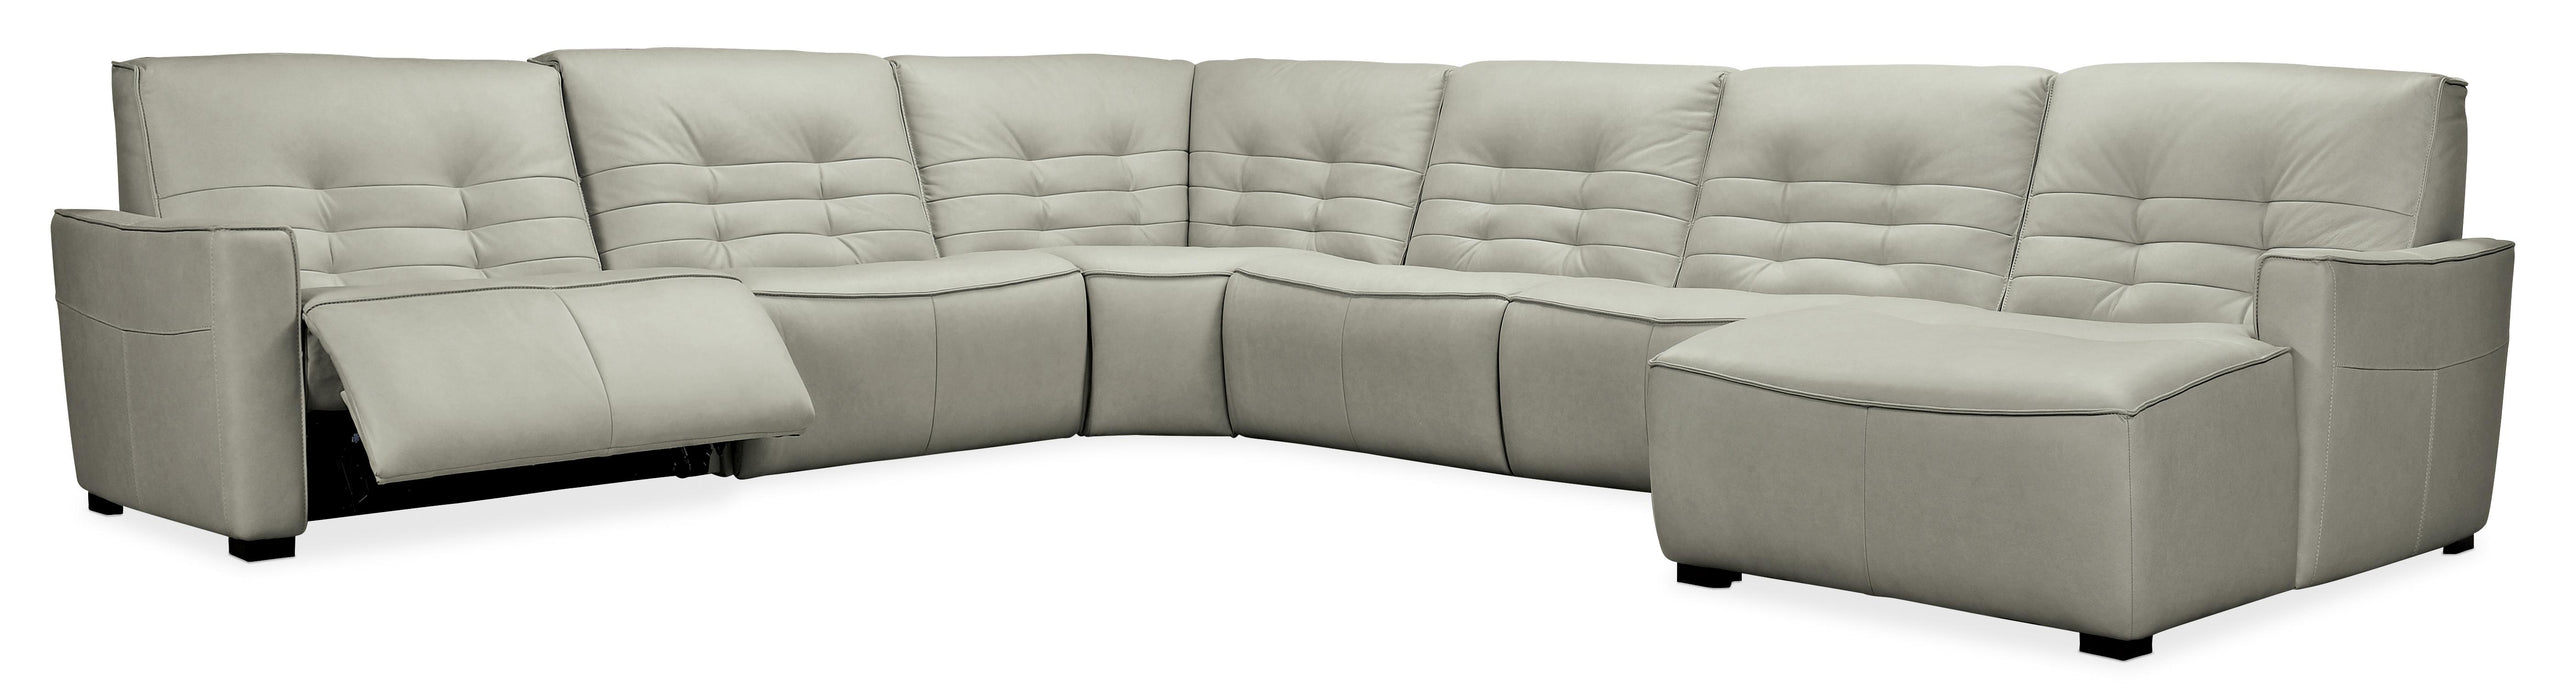 Reaux Grandier 6-Piece RAF Chaise Sectional w/ 2 Recliners image